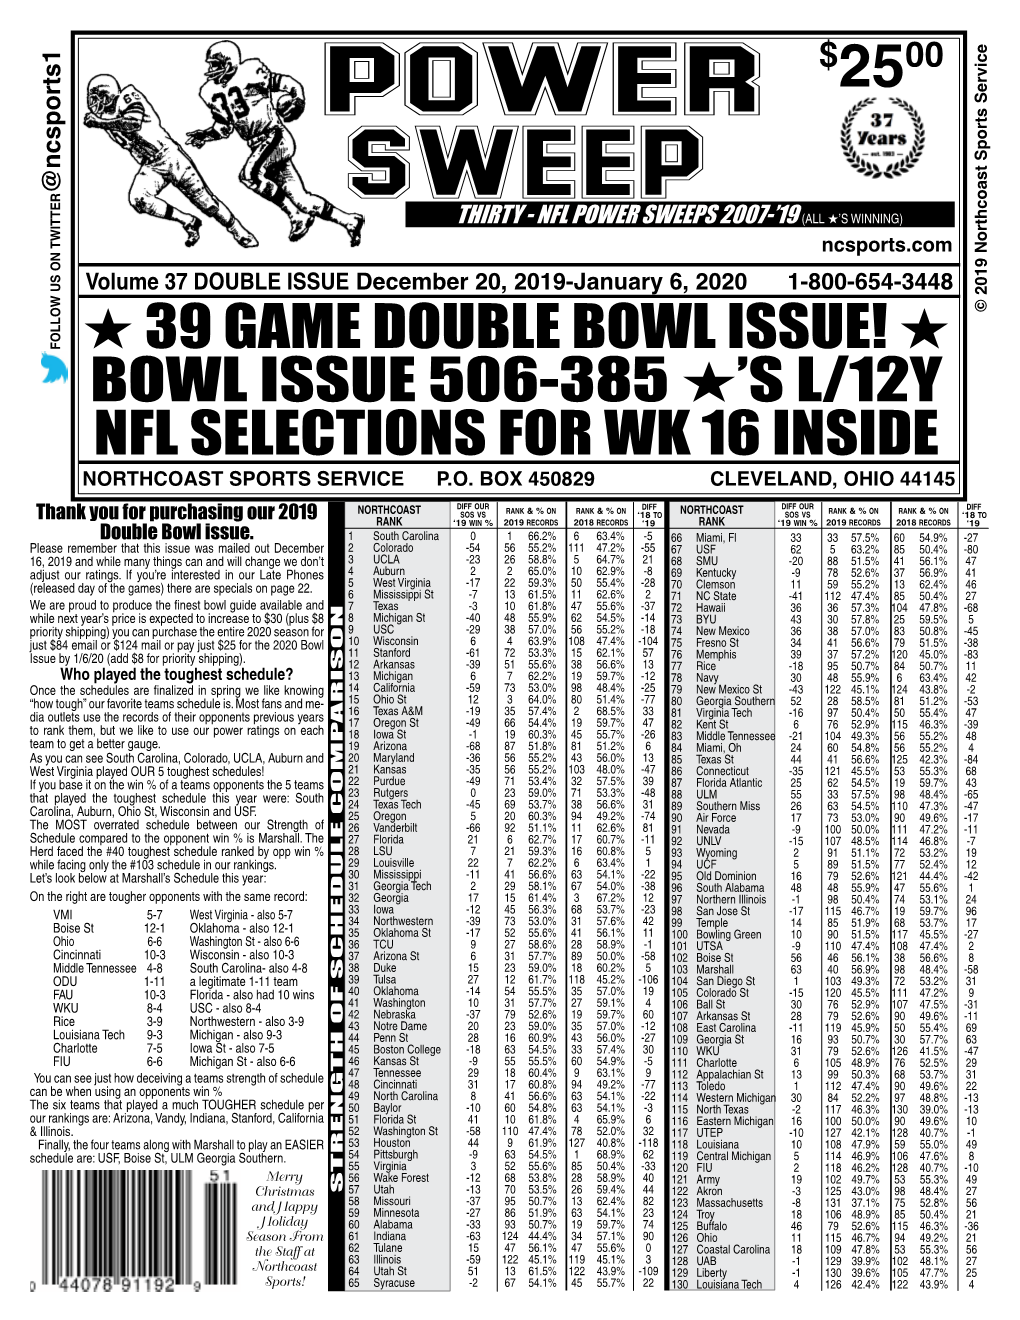 POWER SWEEPS 2007-’19 (ALL H’S WINNING) Ncsports.Com Volume 37 DOUBLE ISSUE December 20, 2019-January 6, 2020 1-800-654-3448 © 2019 Northcoast Sports Service